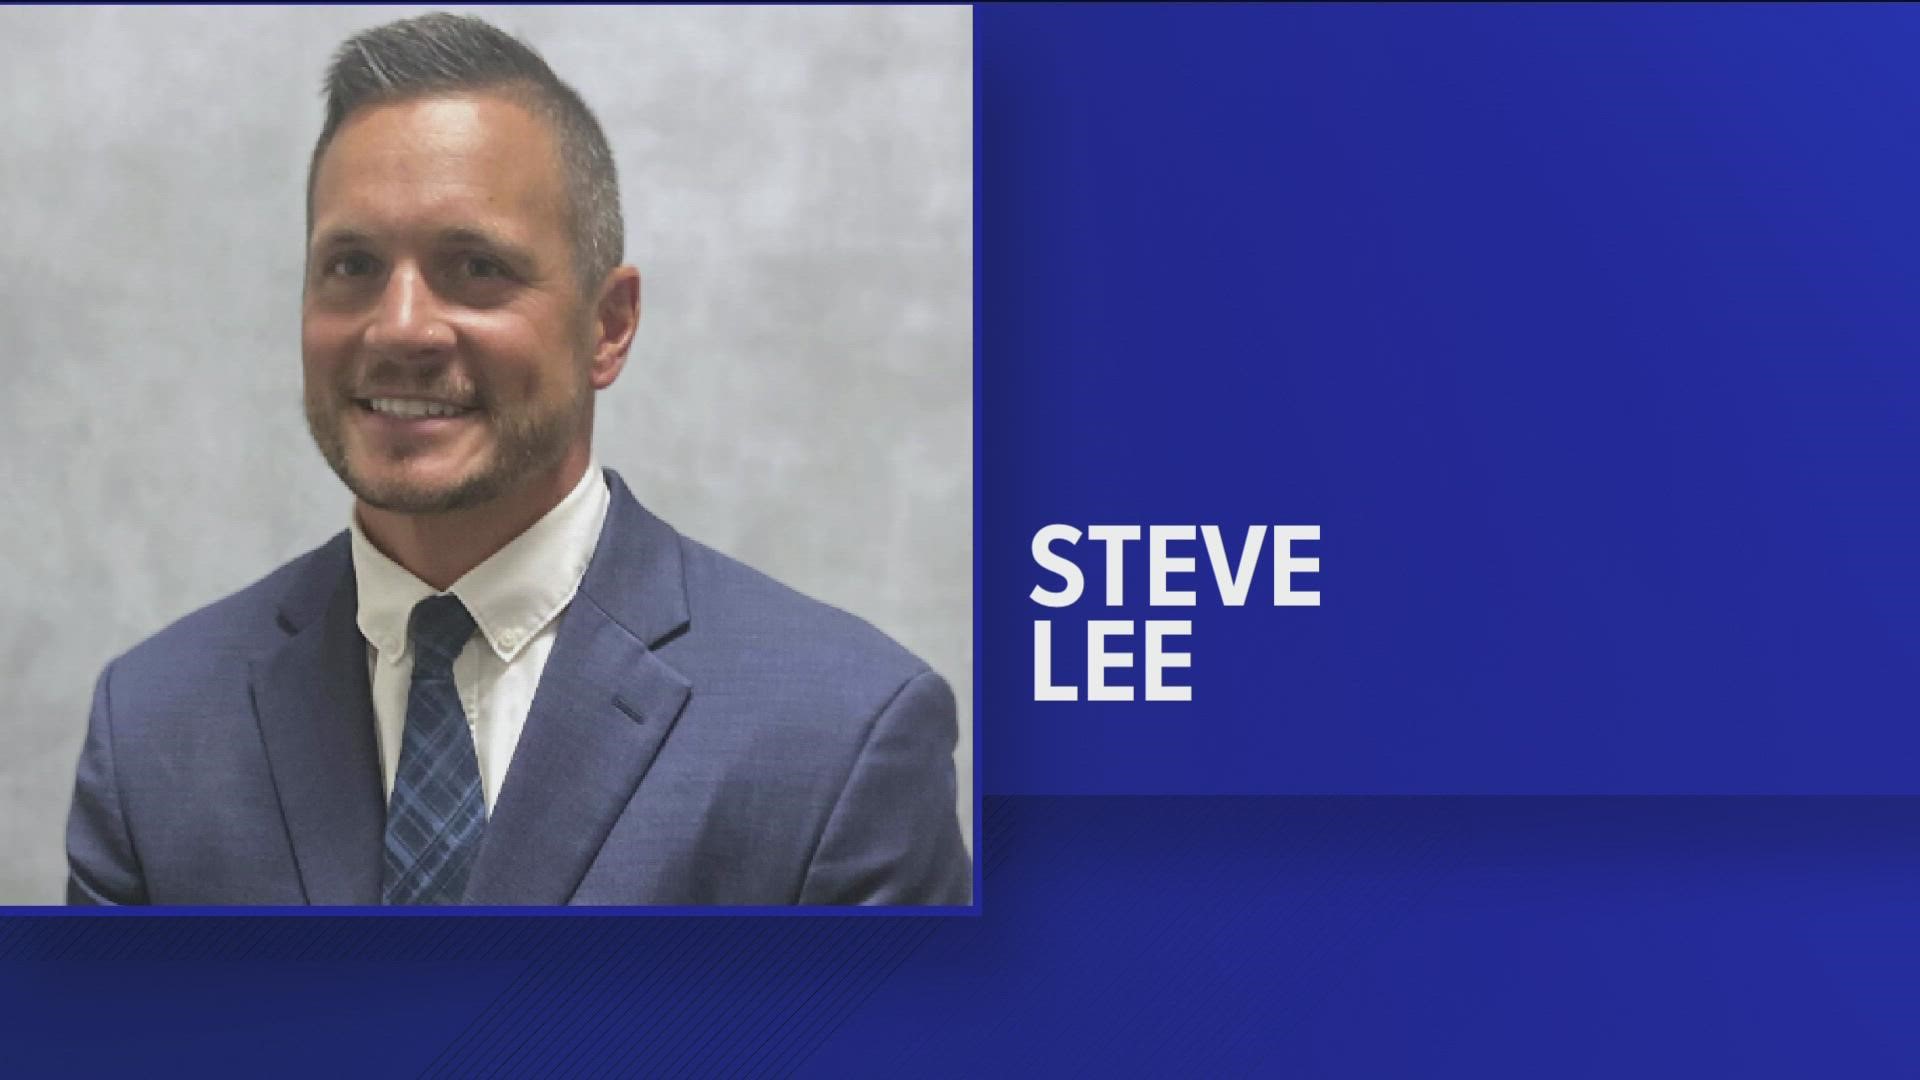 Steve Lee was hired as district superintendent under a four-and-a-half-year contract Monday in a unanimous vote by the Maumee City Schools Board of Education.